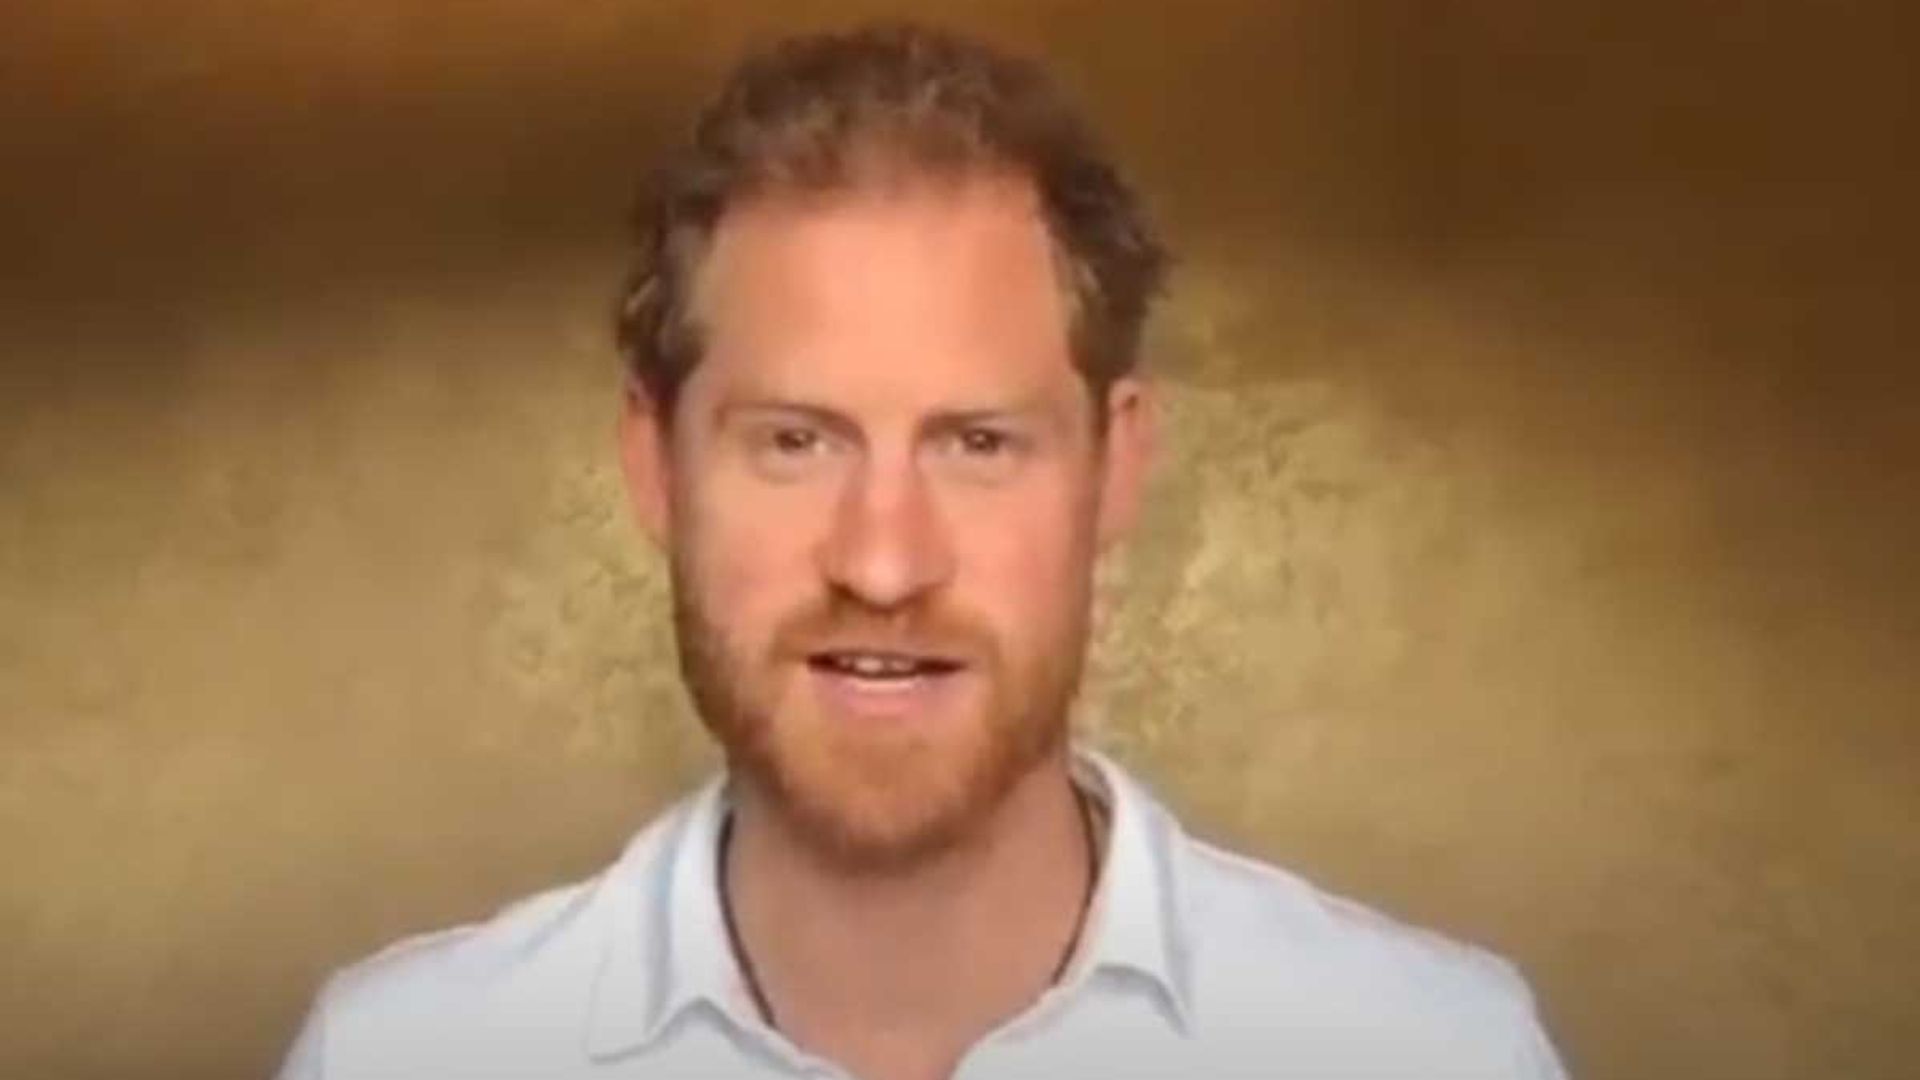 Prince Harry launches new challenge with military charity - watch video